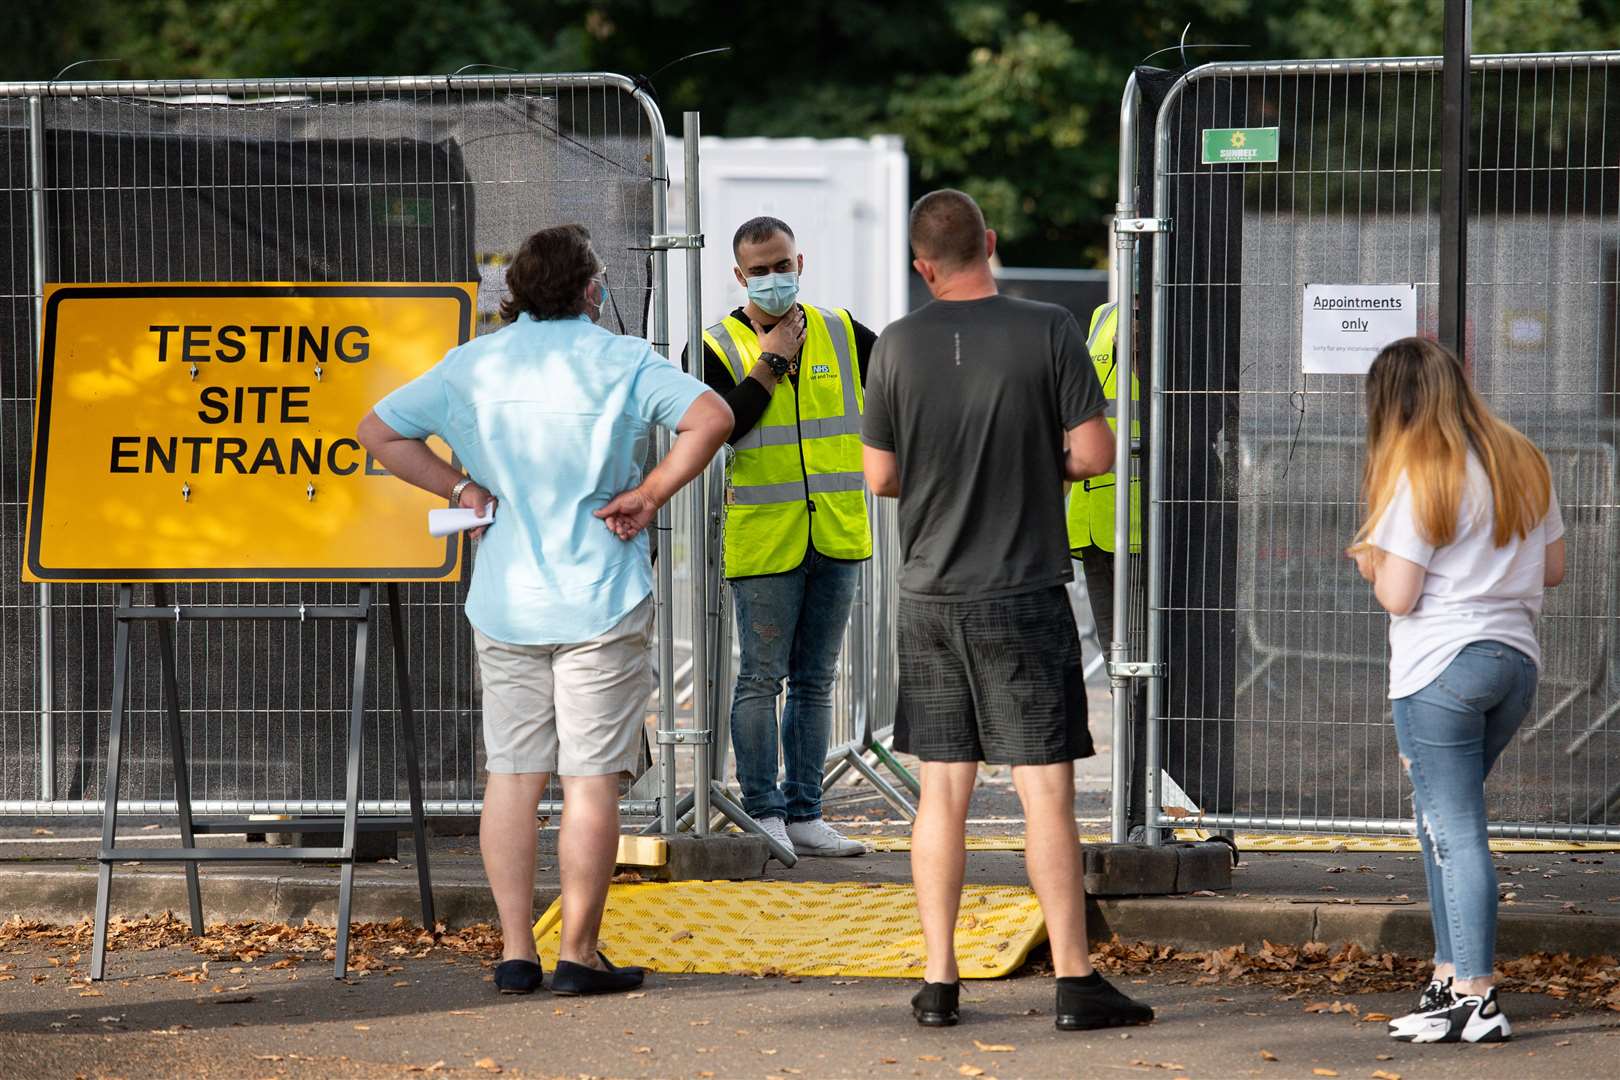 Members of the public speak with staff at a coronavirus testing facility in Sutton Coldfield, Birmingham (Jacob King/PA)